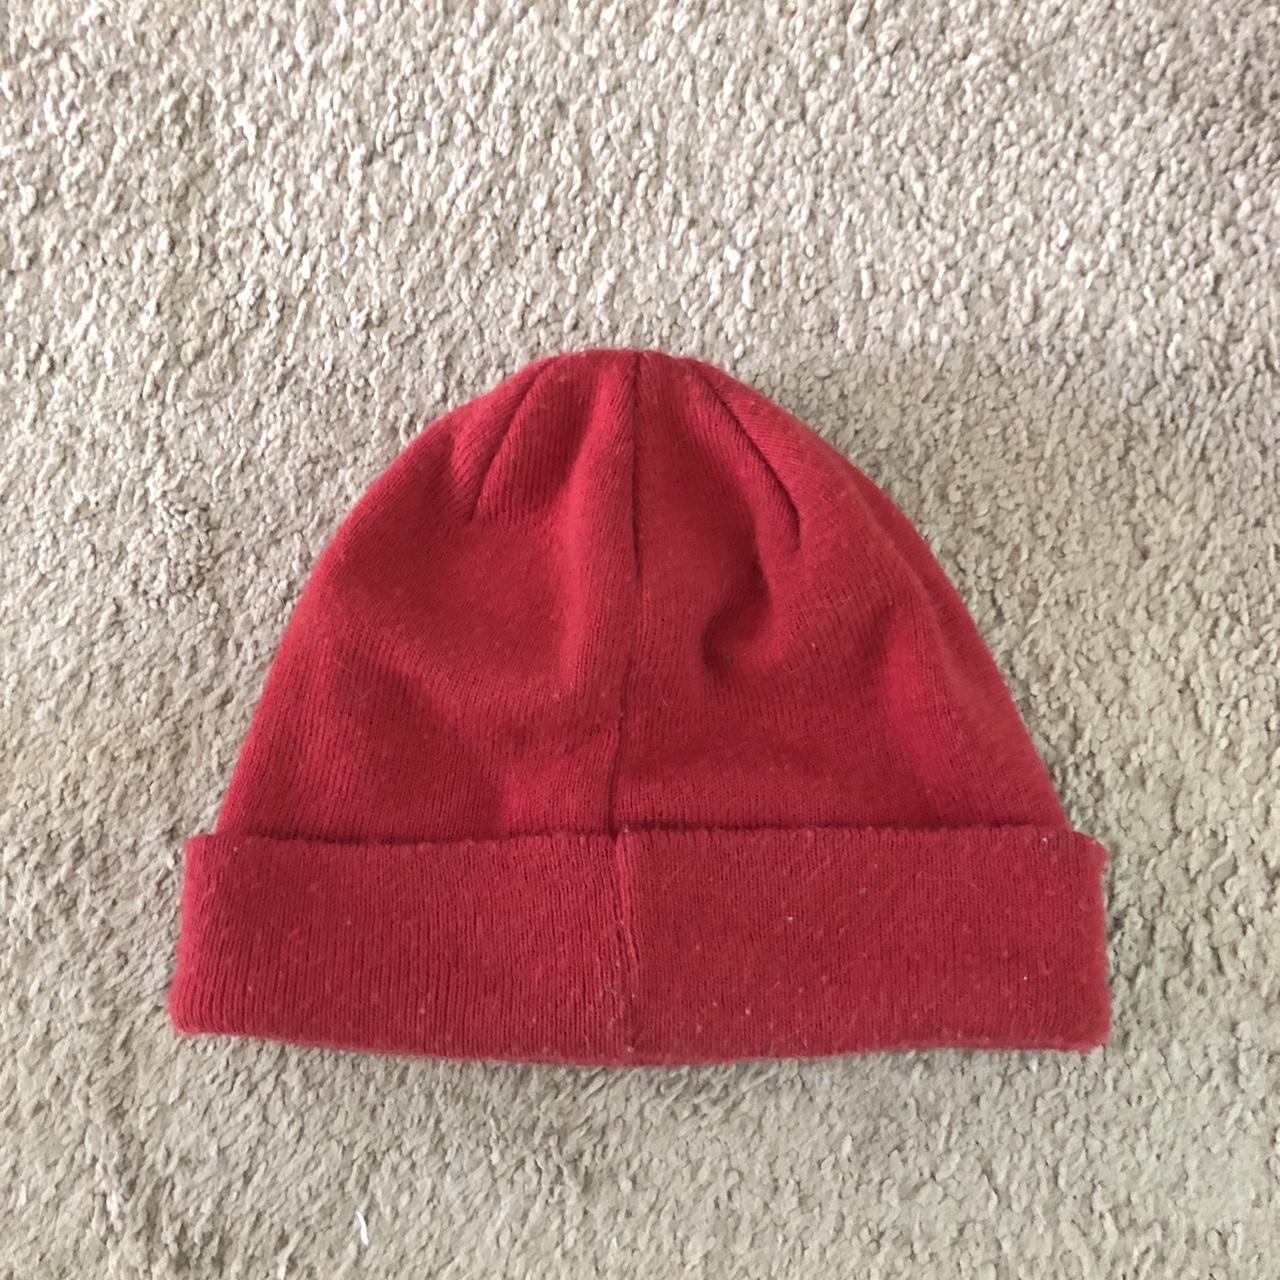 Palace Men's Burgundy and Red Hat (2)